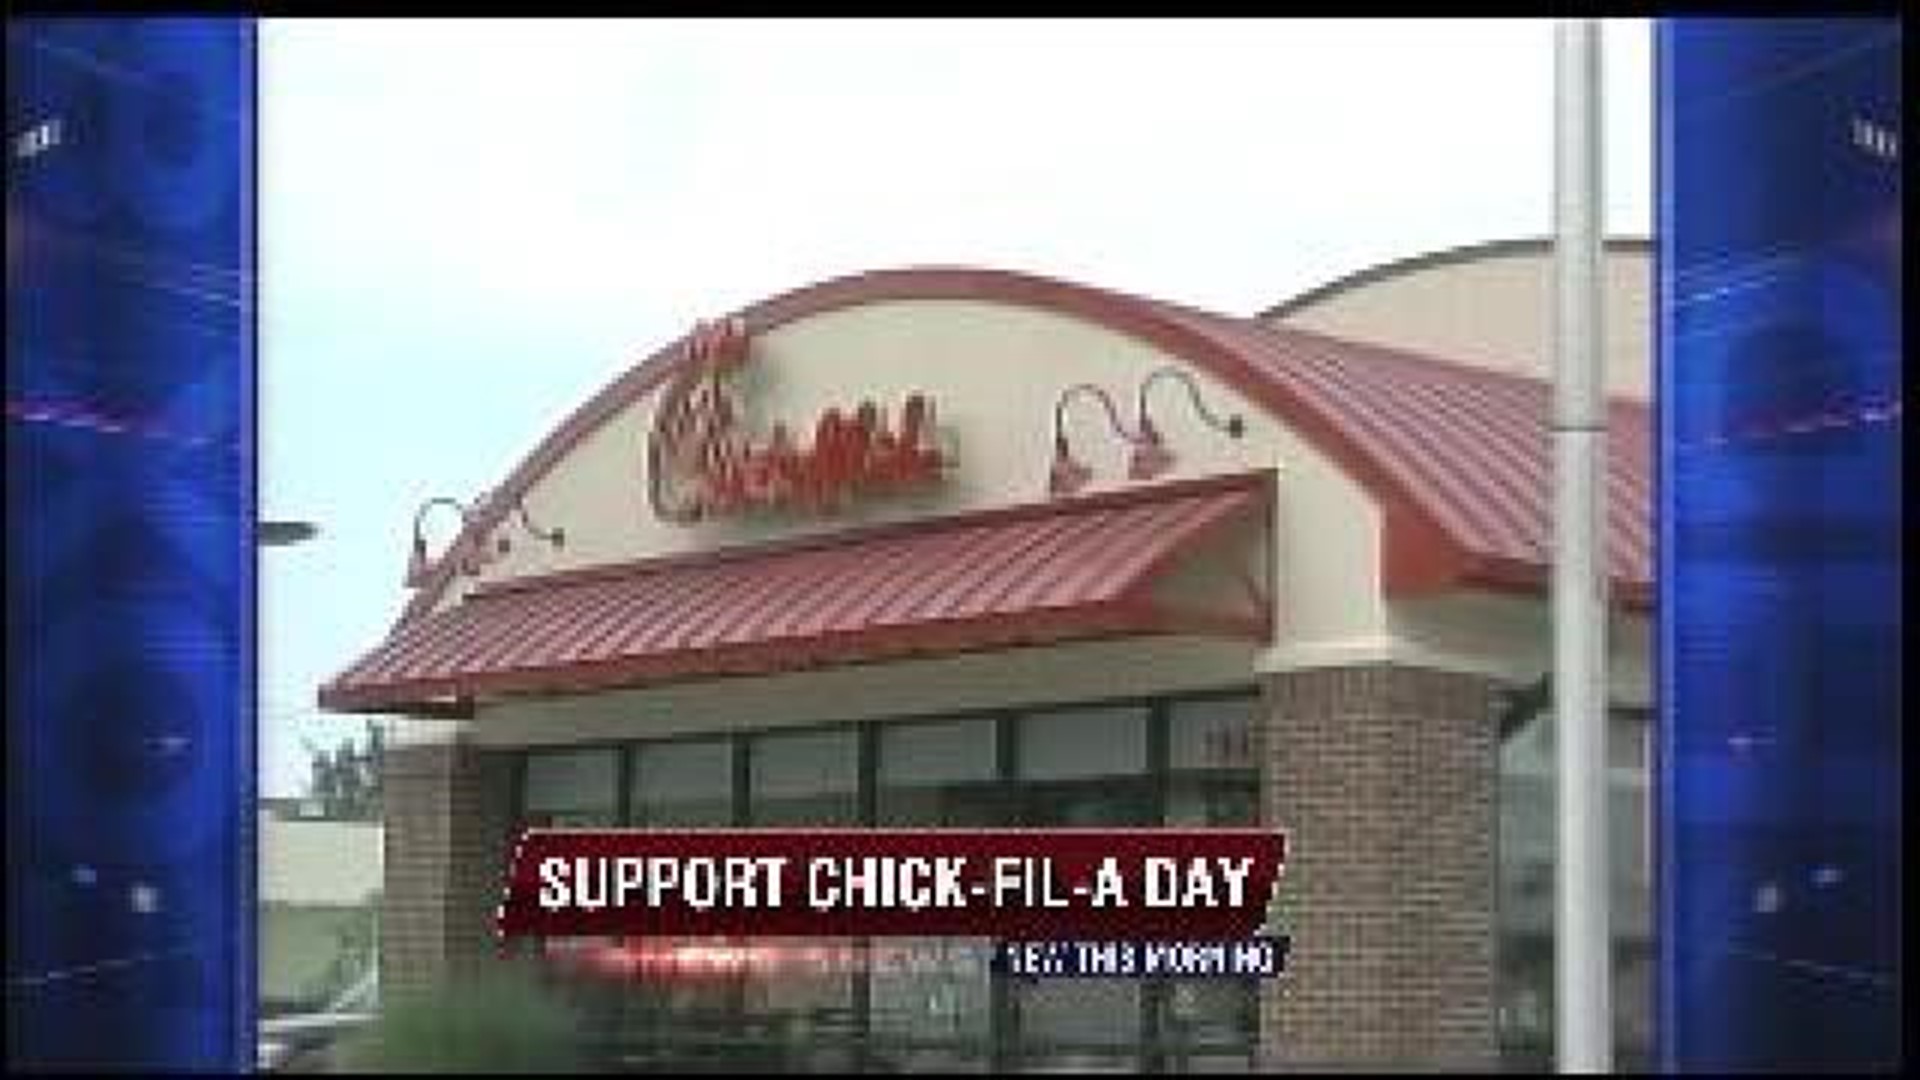 Support Chick-Fil-A-Day Wednesday